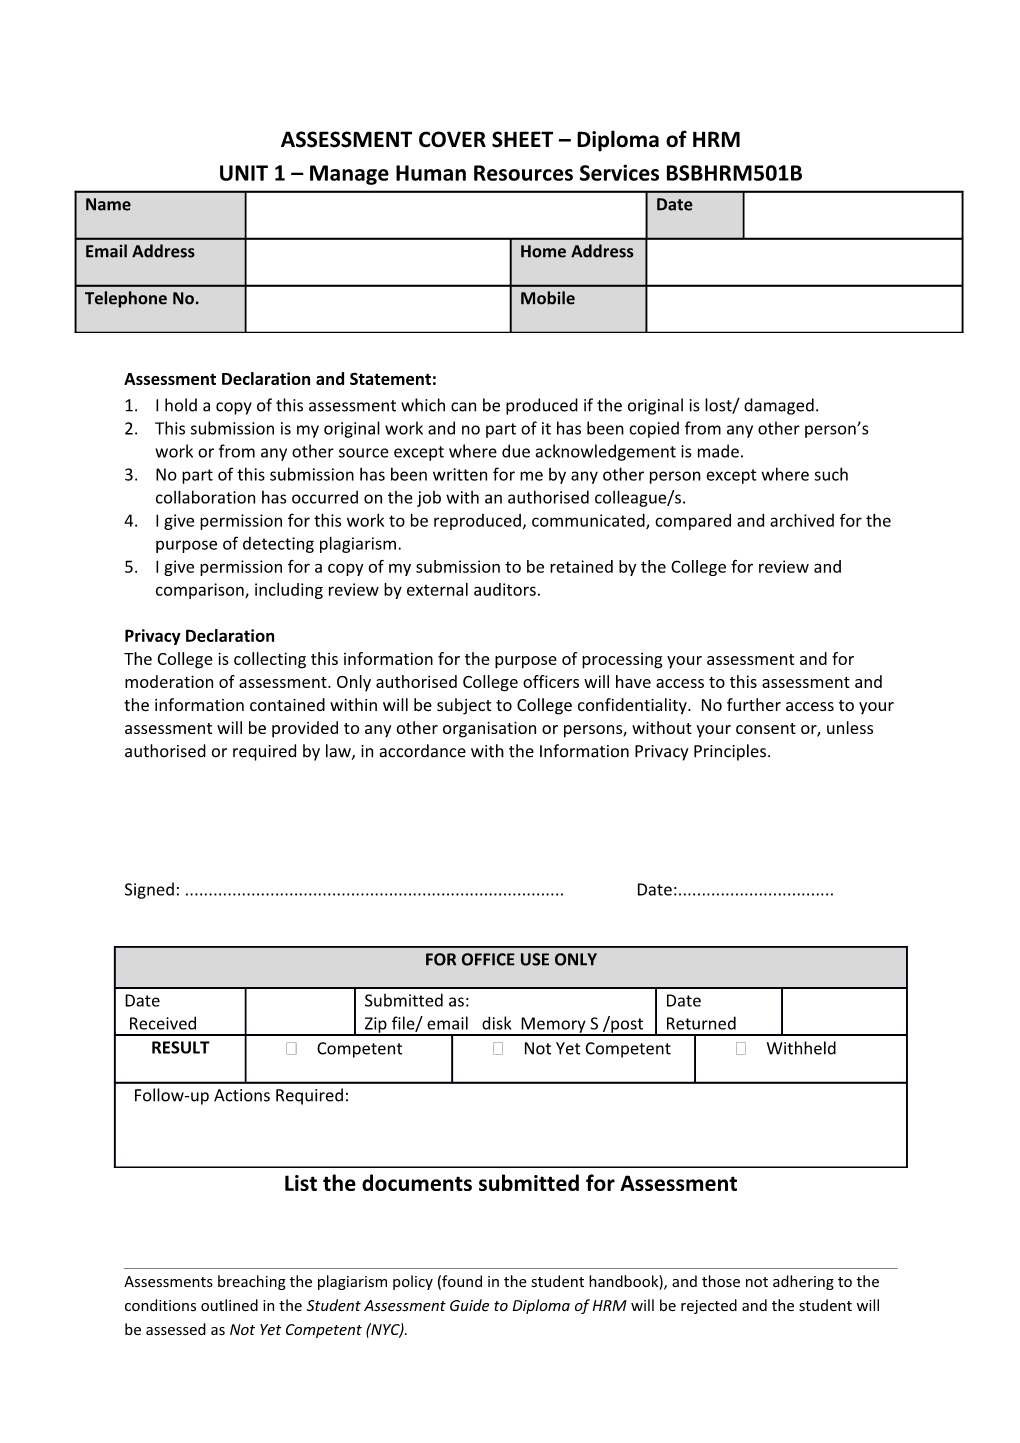 ASSESSMENT COVER SHEET Diploma of HRM